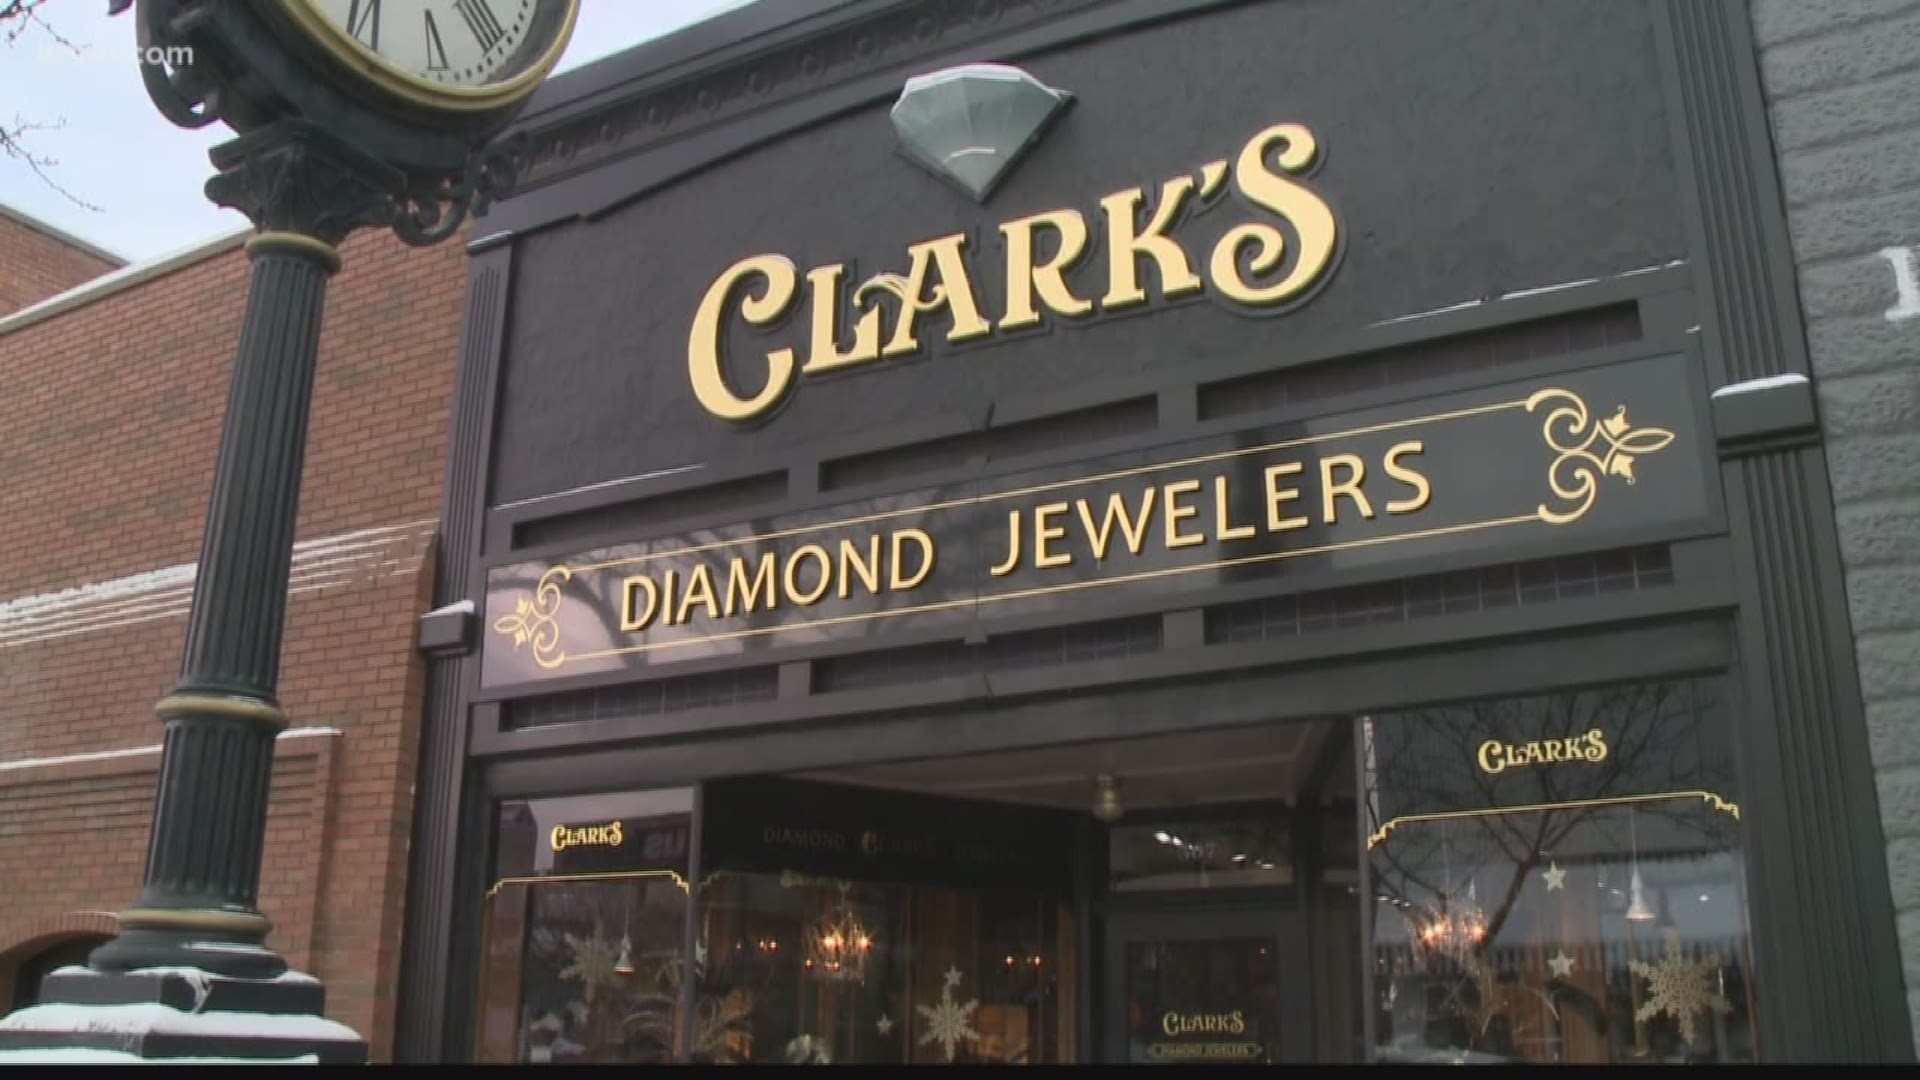 A Coeur d'Alene jewelry store is offering refunds to some customers since it snowed at least 3 inches over the weekend. The promotion ran during the holiday season.